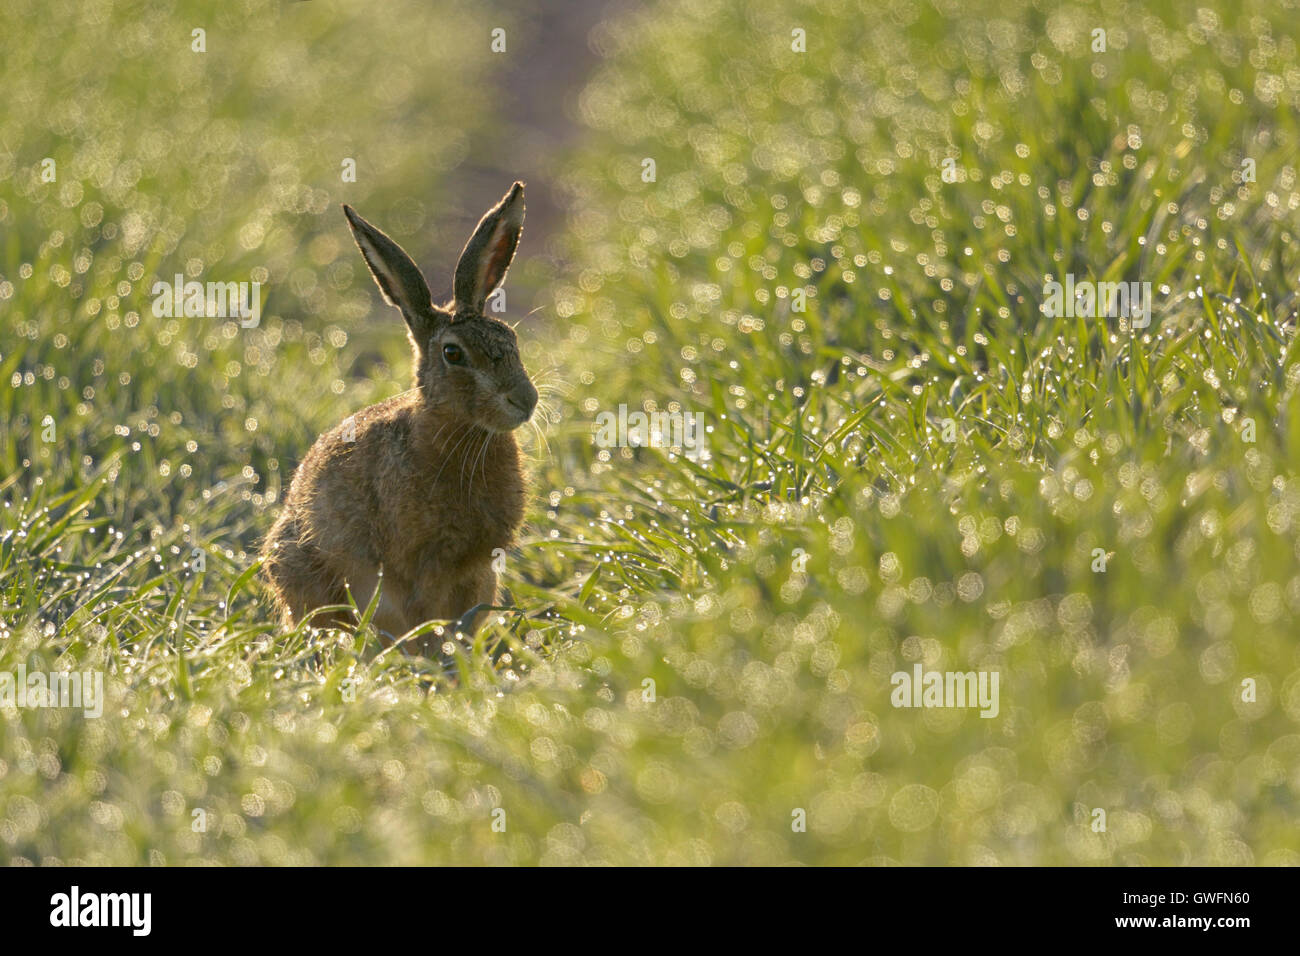 Brown Hare / Feldhase ( Lepus europaeus ) sitting in a field of winter wheat, thousands of dewdrops sparkling in morning light. Stock Photo